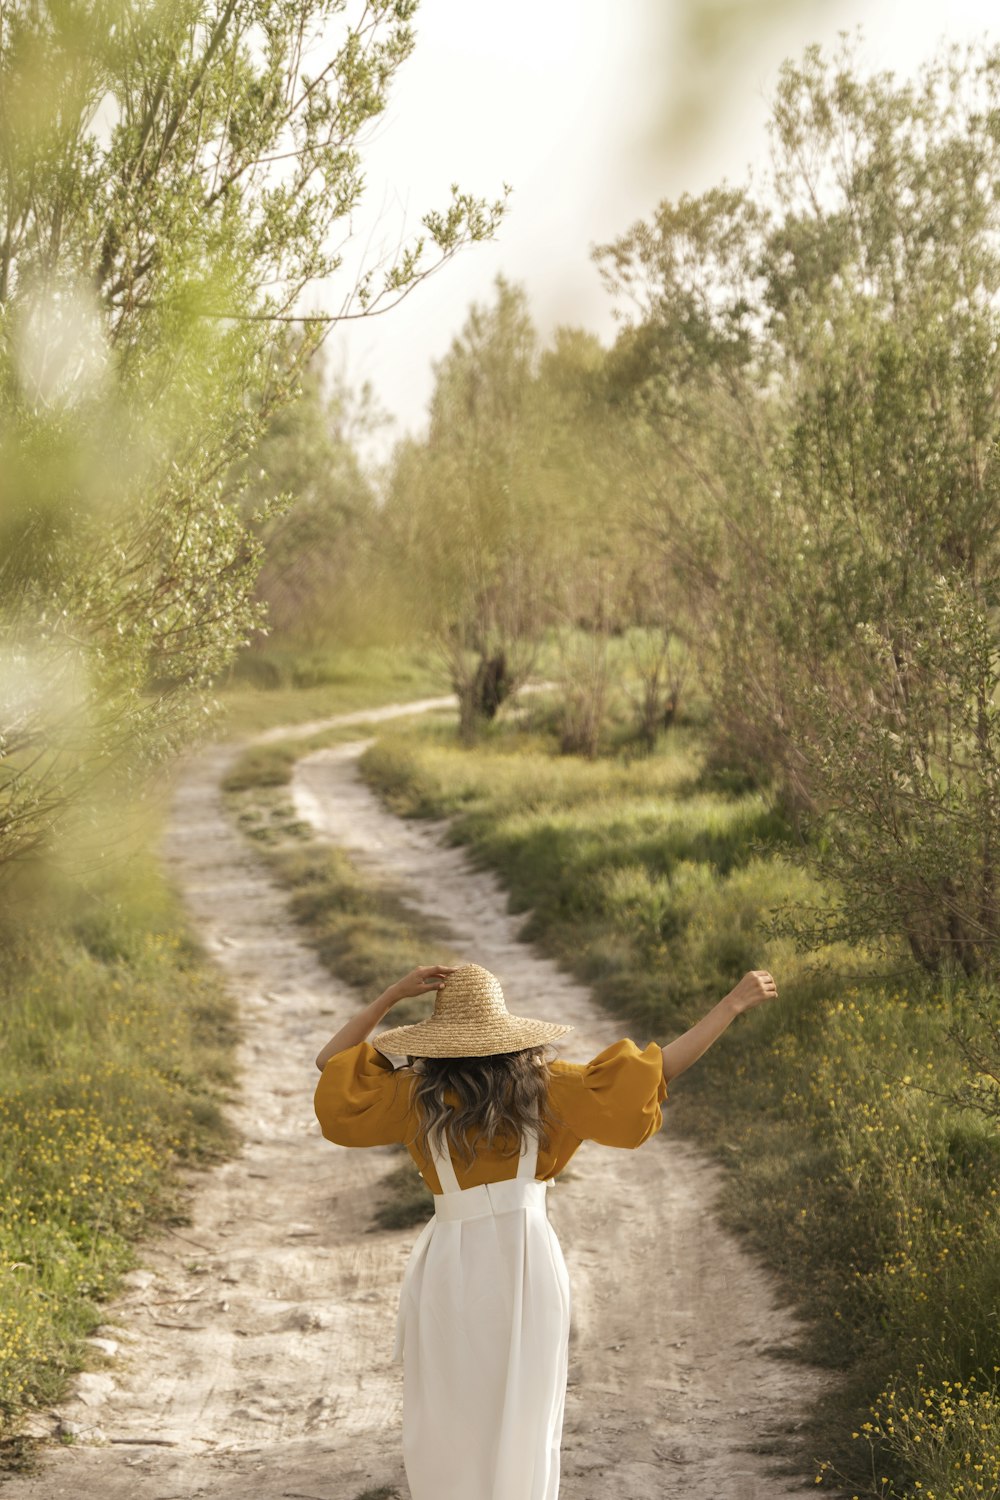 a person in a white dress and hat walking on a dirt path